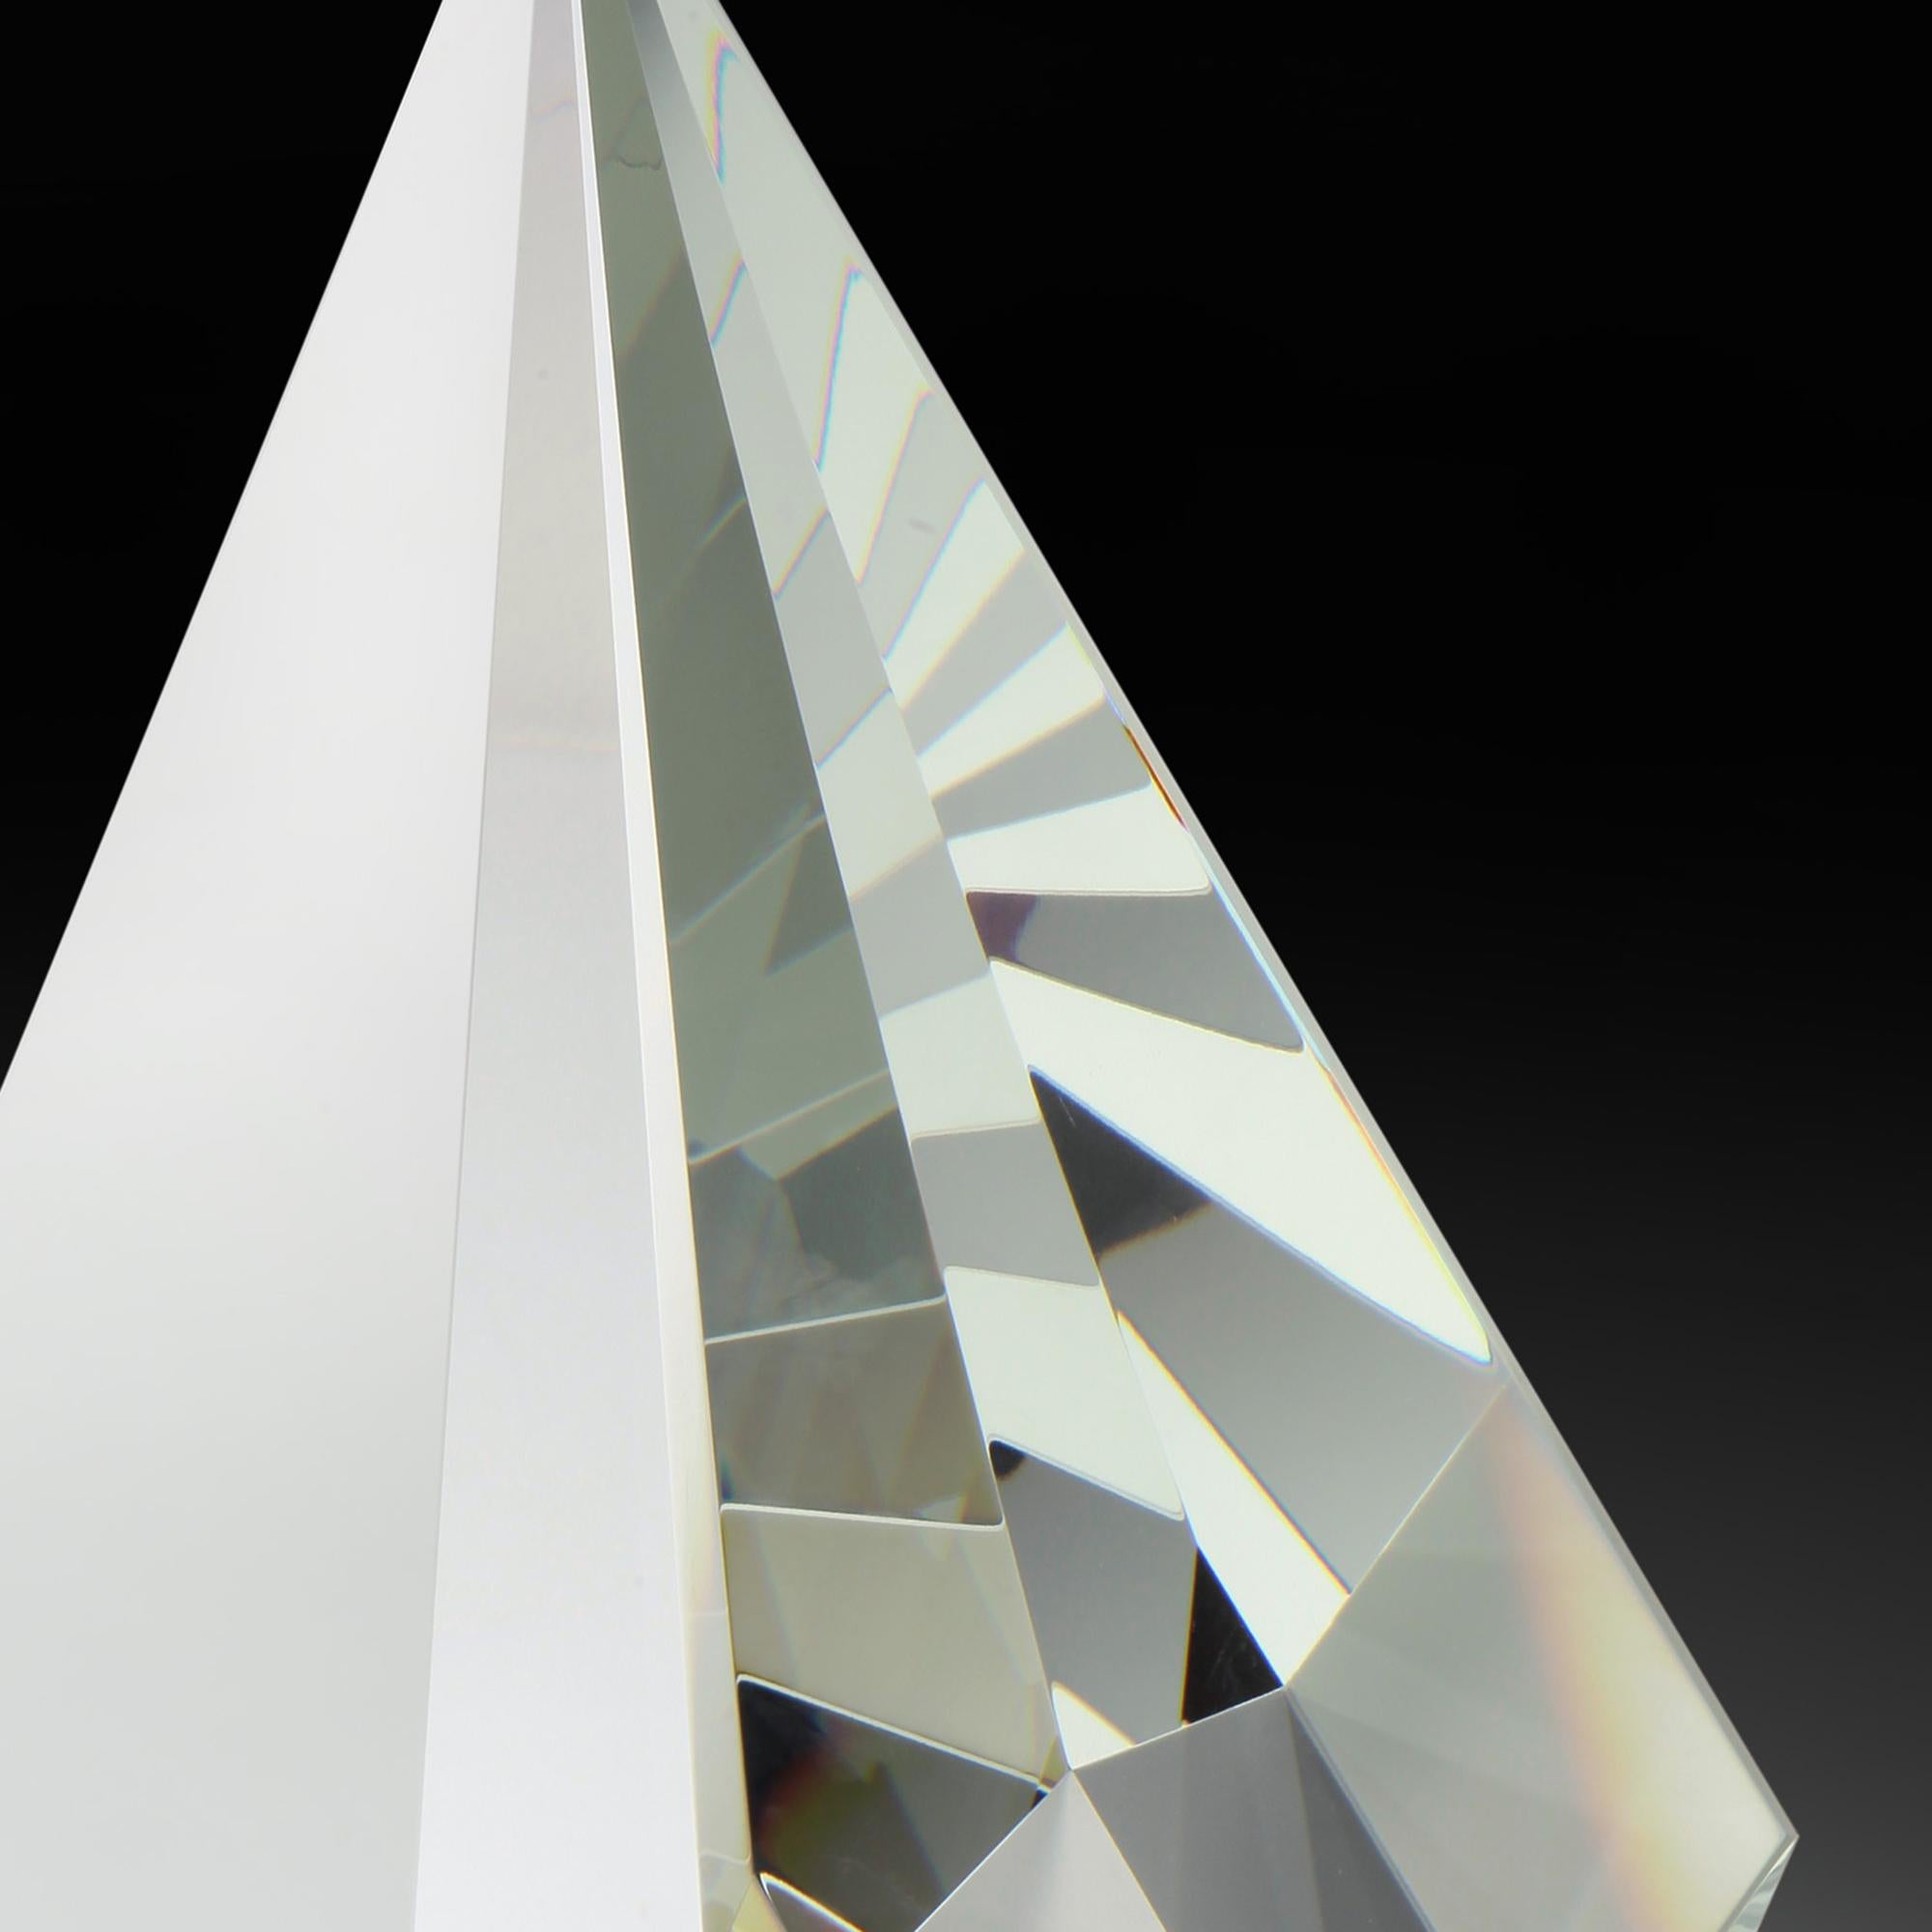 This abstract optic glass sculpture is noteworthy for both its geometric shape and purity. Brzon uses pure optic glass, void of any defects, which enables its perfection to shine through. The cuts and contours of the design enhance the reflections